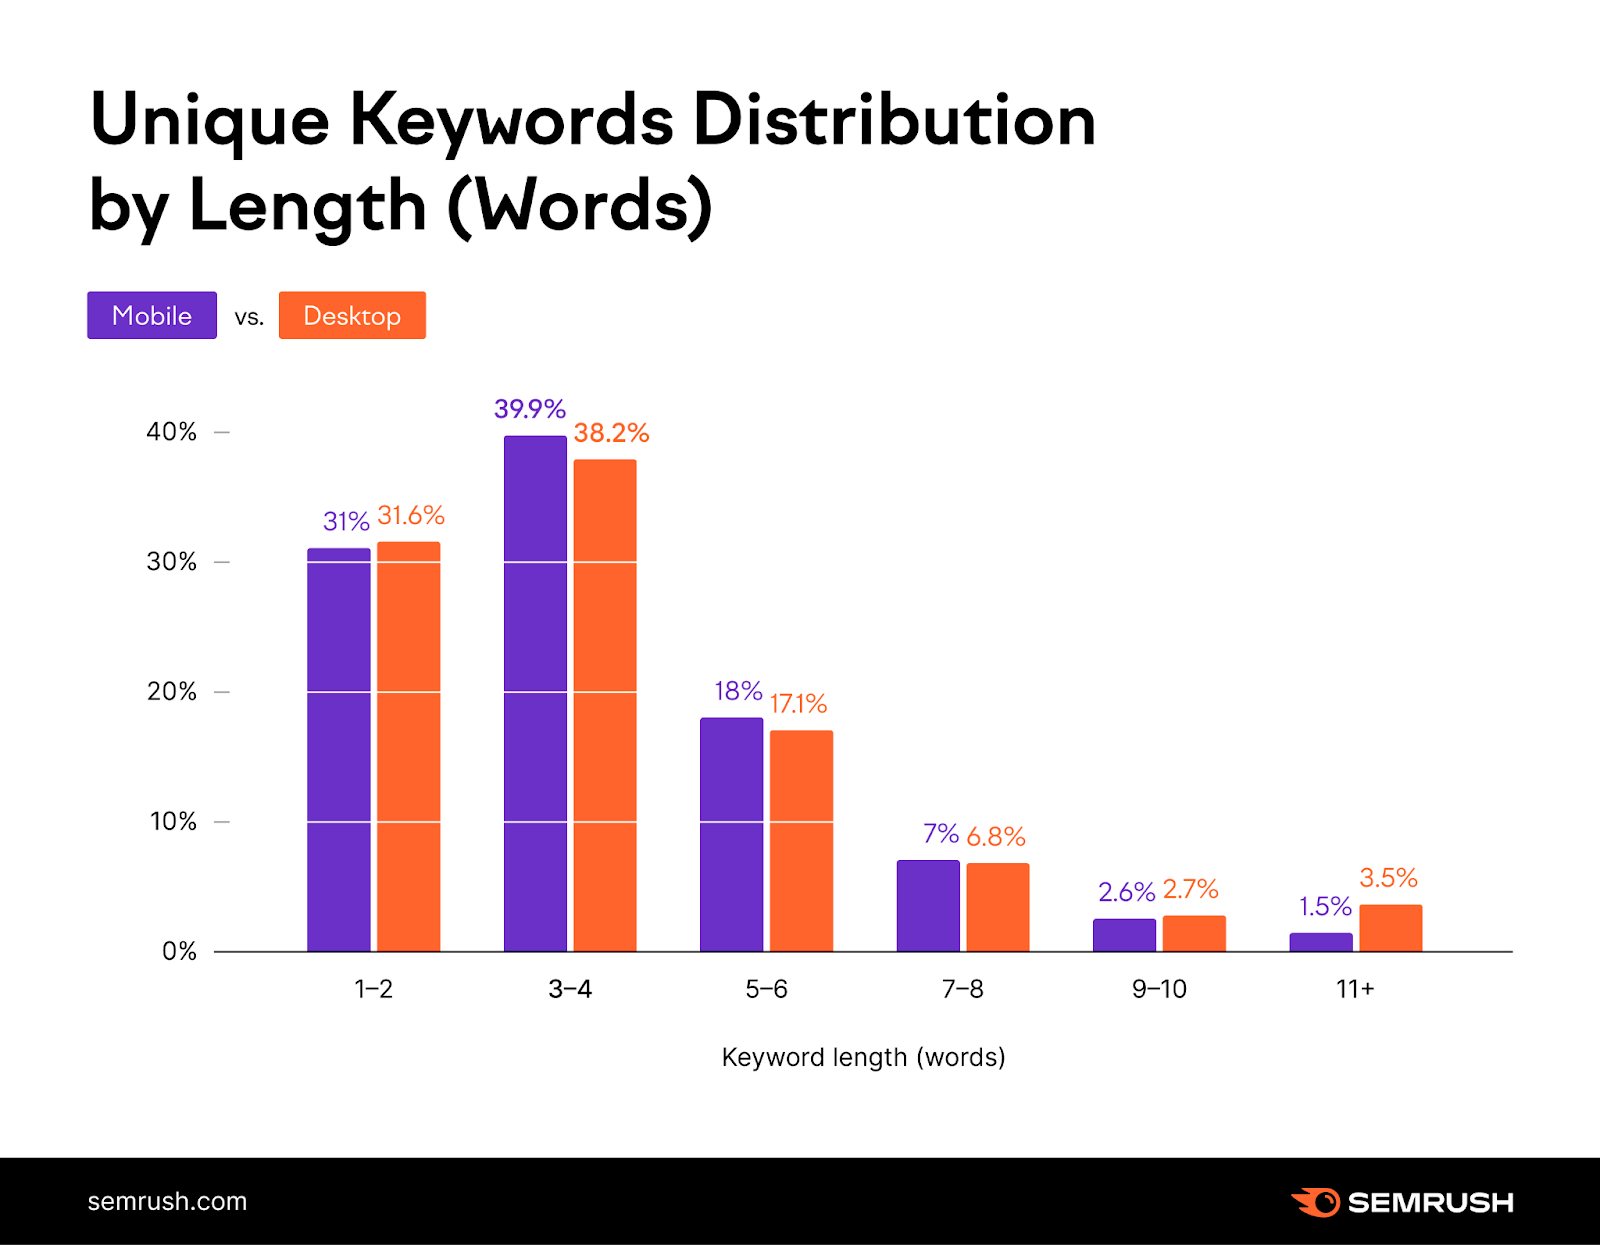 Semrush data showing unique keywords distribution by length (words)